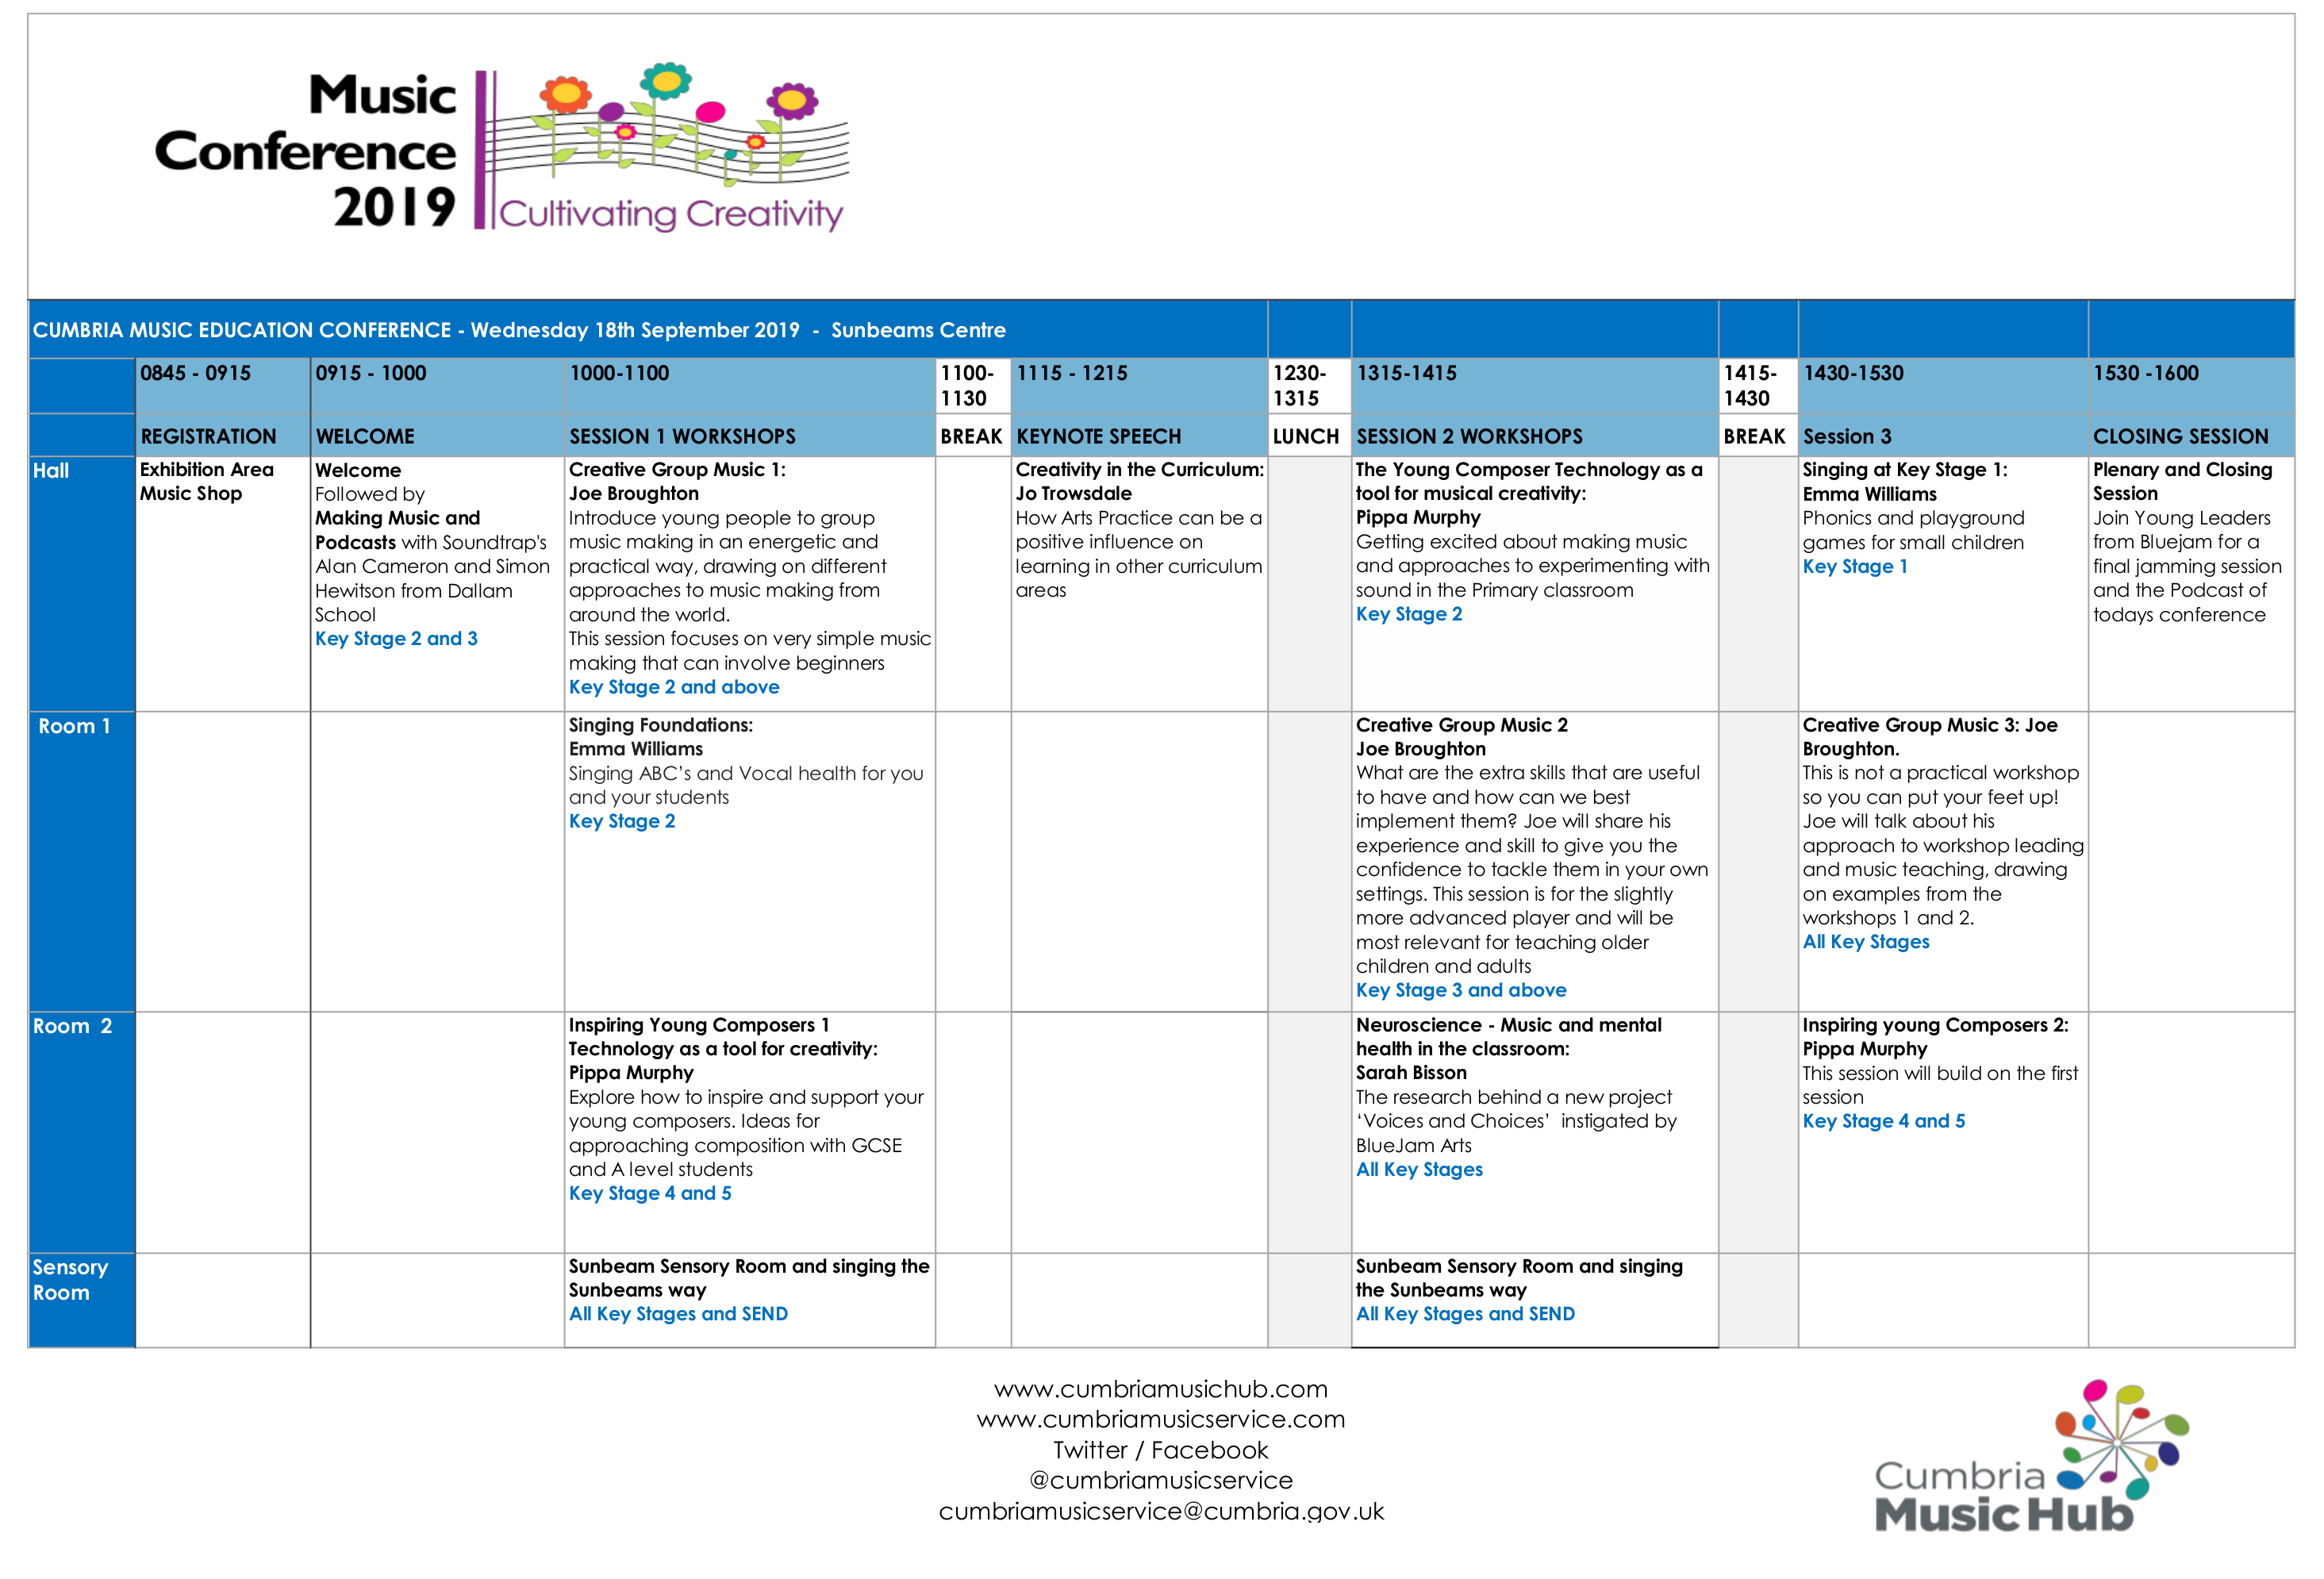 2019 Music Conference Programme